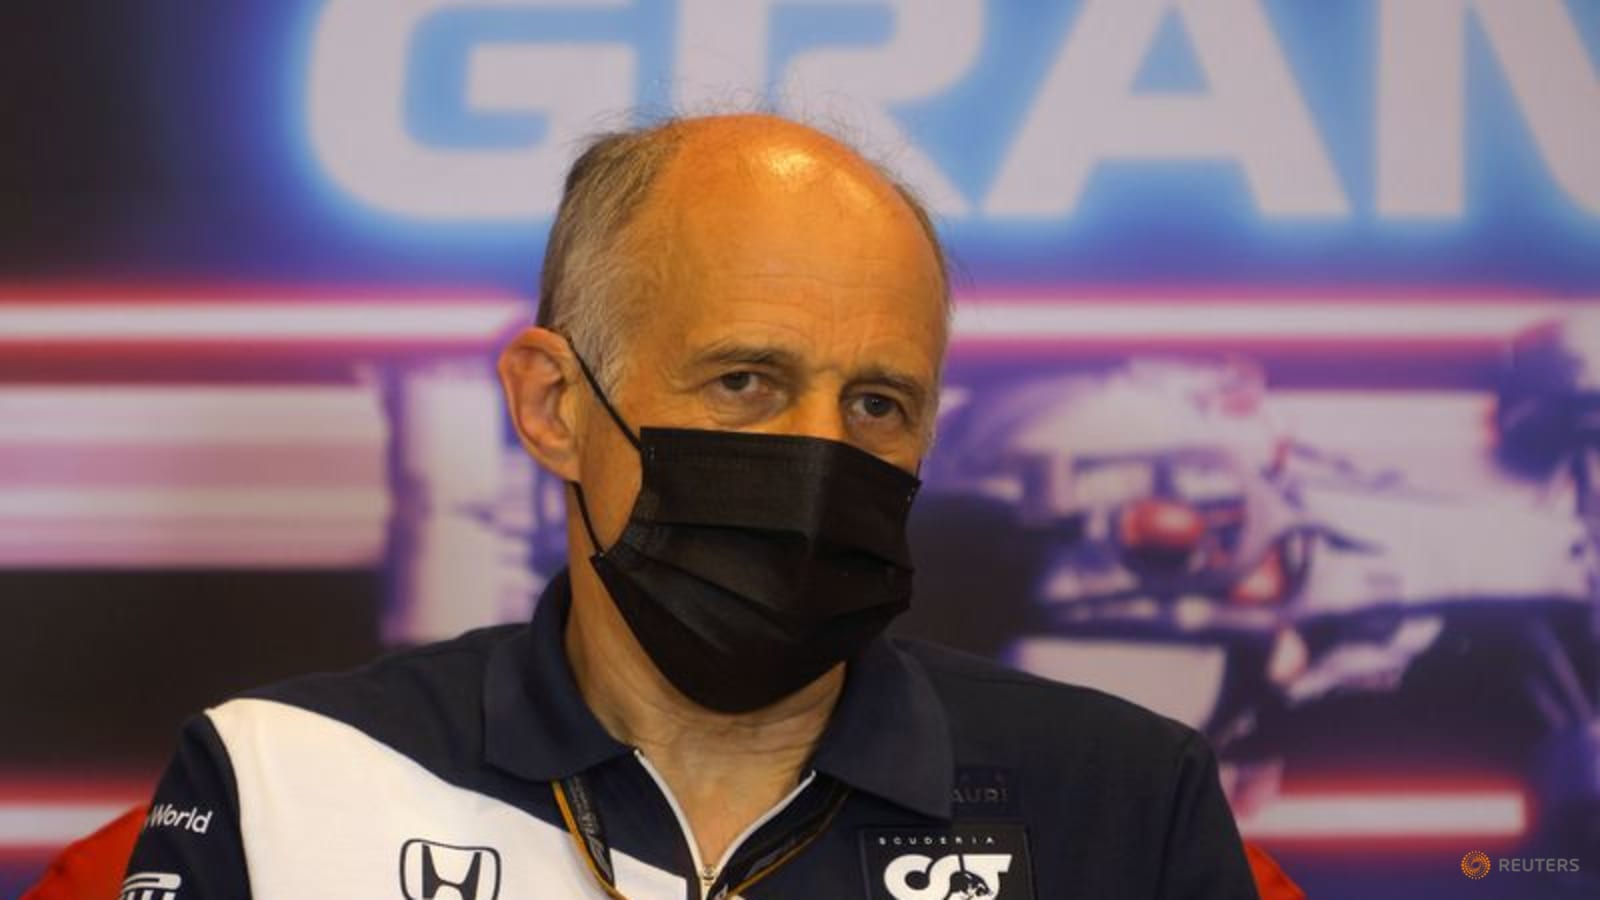 F1 team staff unhappy with record 23 races should leave, says Tost thumbnail